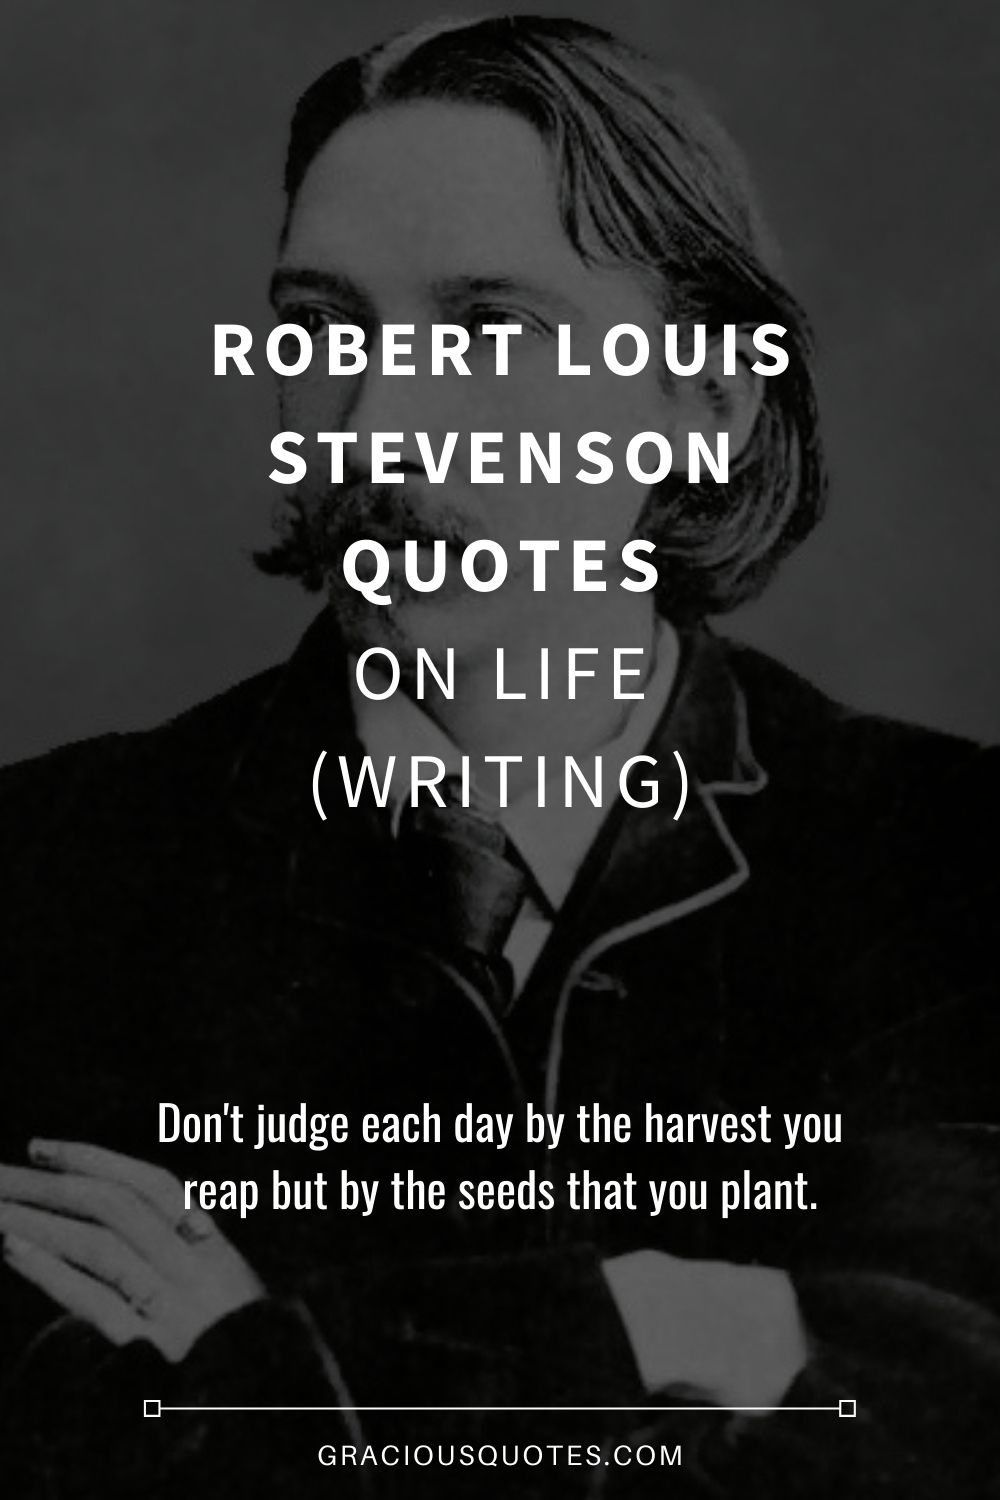 Robert Louis Stevenson Quotes on Life (WRITING) - Gracious Quotes